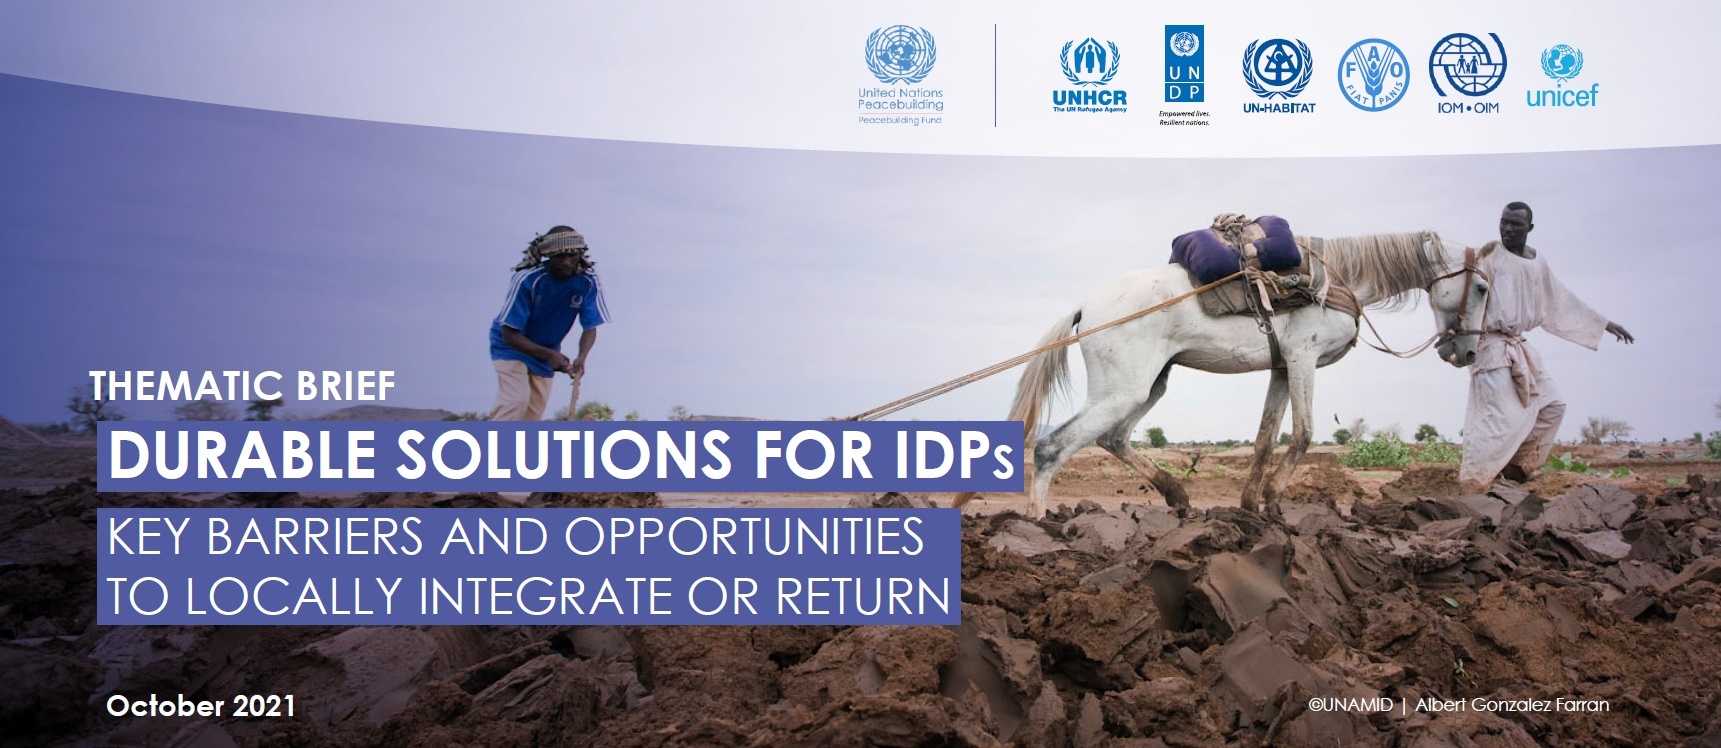 DURABLE SOLUTIONS FOR IDPs - KEY BARRIERS AND OPPORTUNITIES TO LOCALLY INTEGRATE OR RETURN